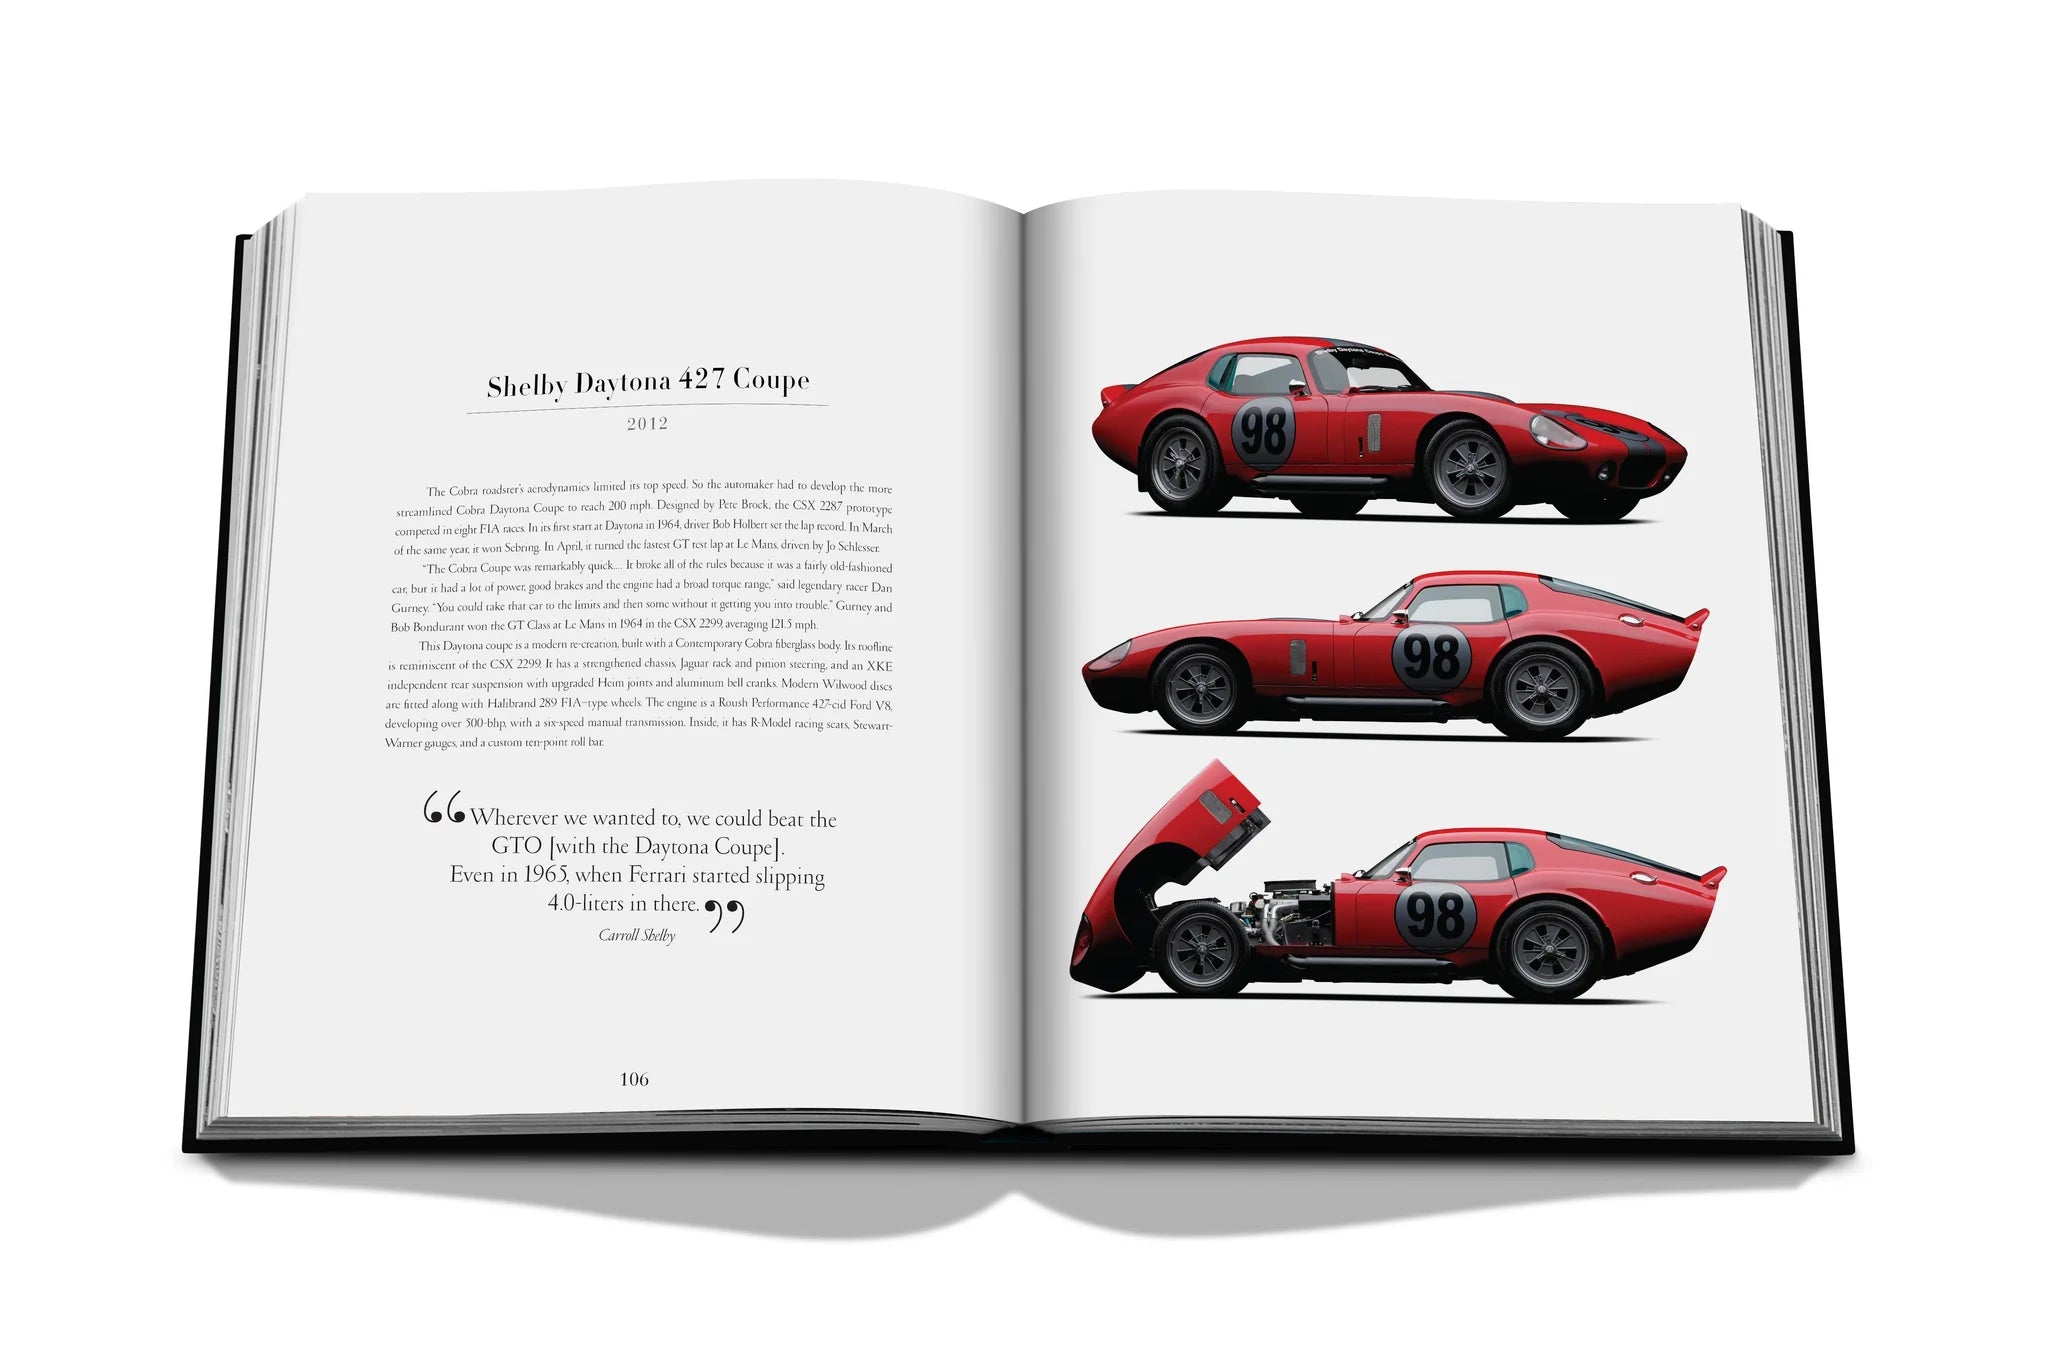 MILES NADAL ICONIC: ART,DESIGN, ADVERTISING AND THE  AUTOMOBILE